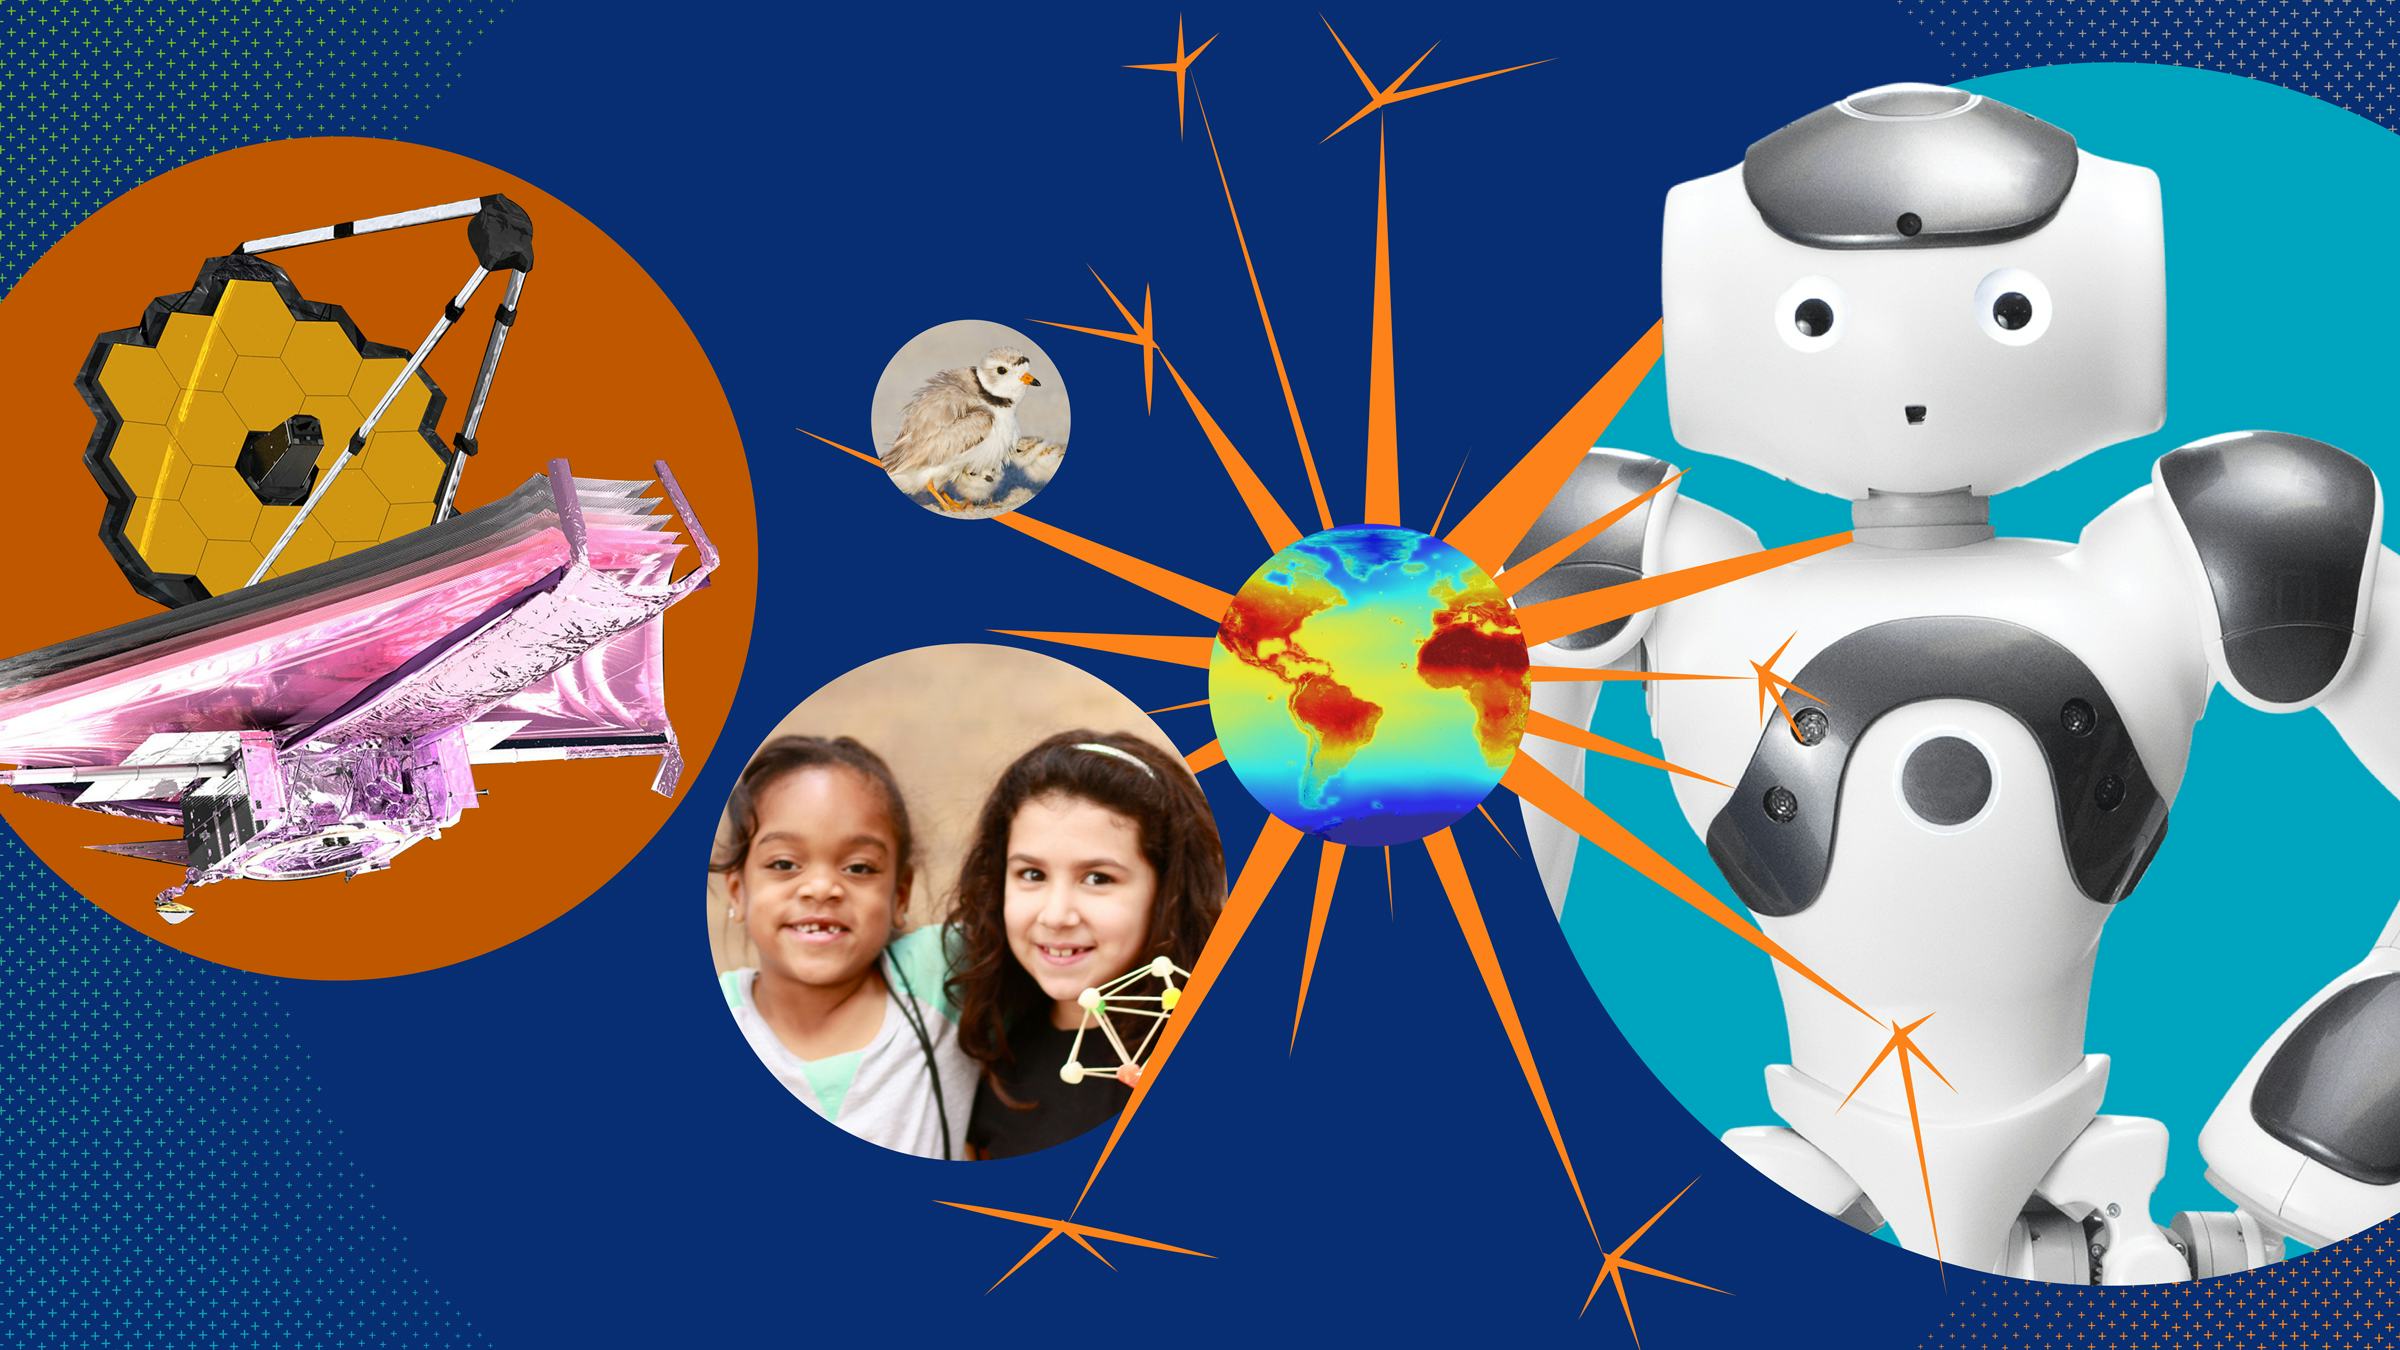 A space telescope, two girls, a planet, a bird and a robot represent science festival events